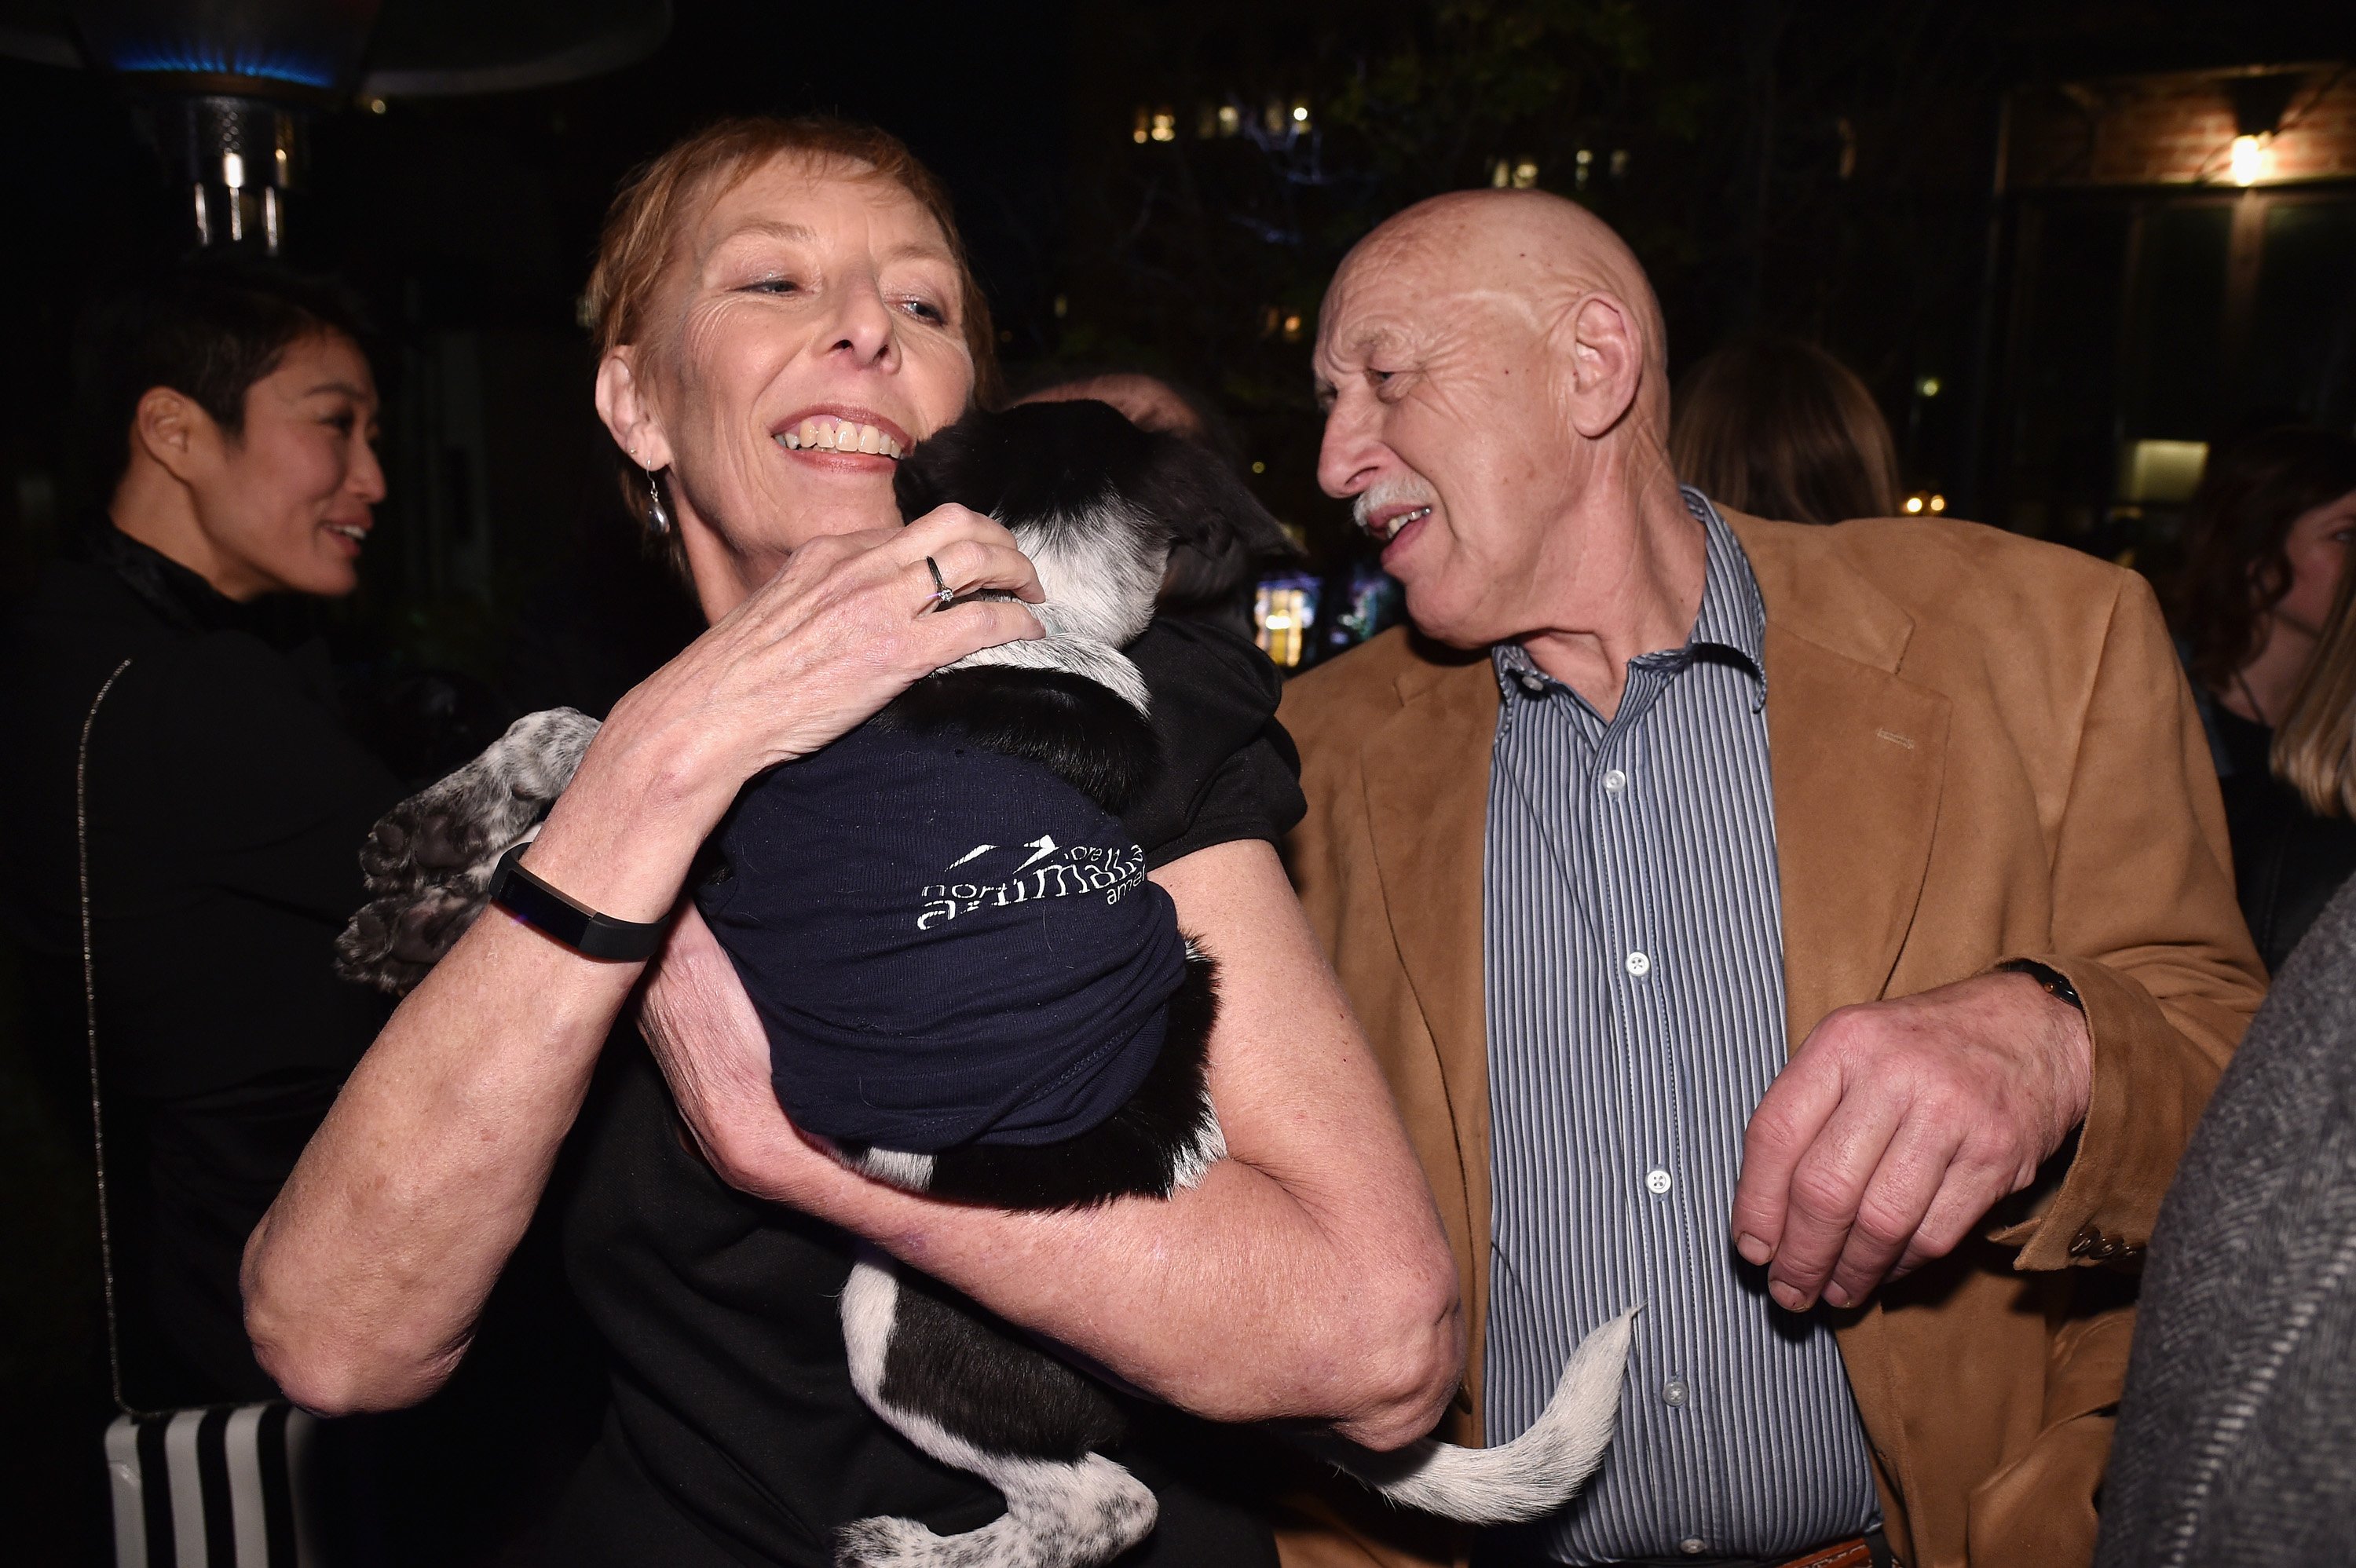 Left to right: 'The Incredible Dr. Pol' stars Diane Pol and her husband Dr. Jan Pol